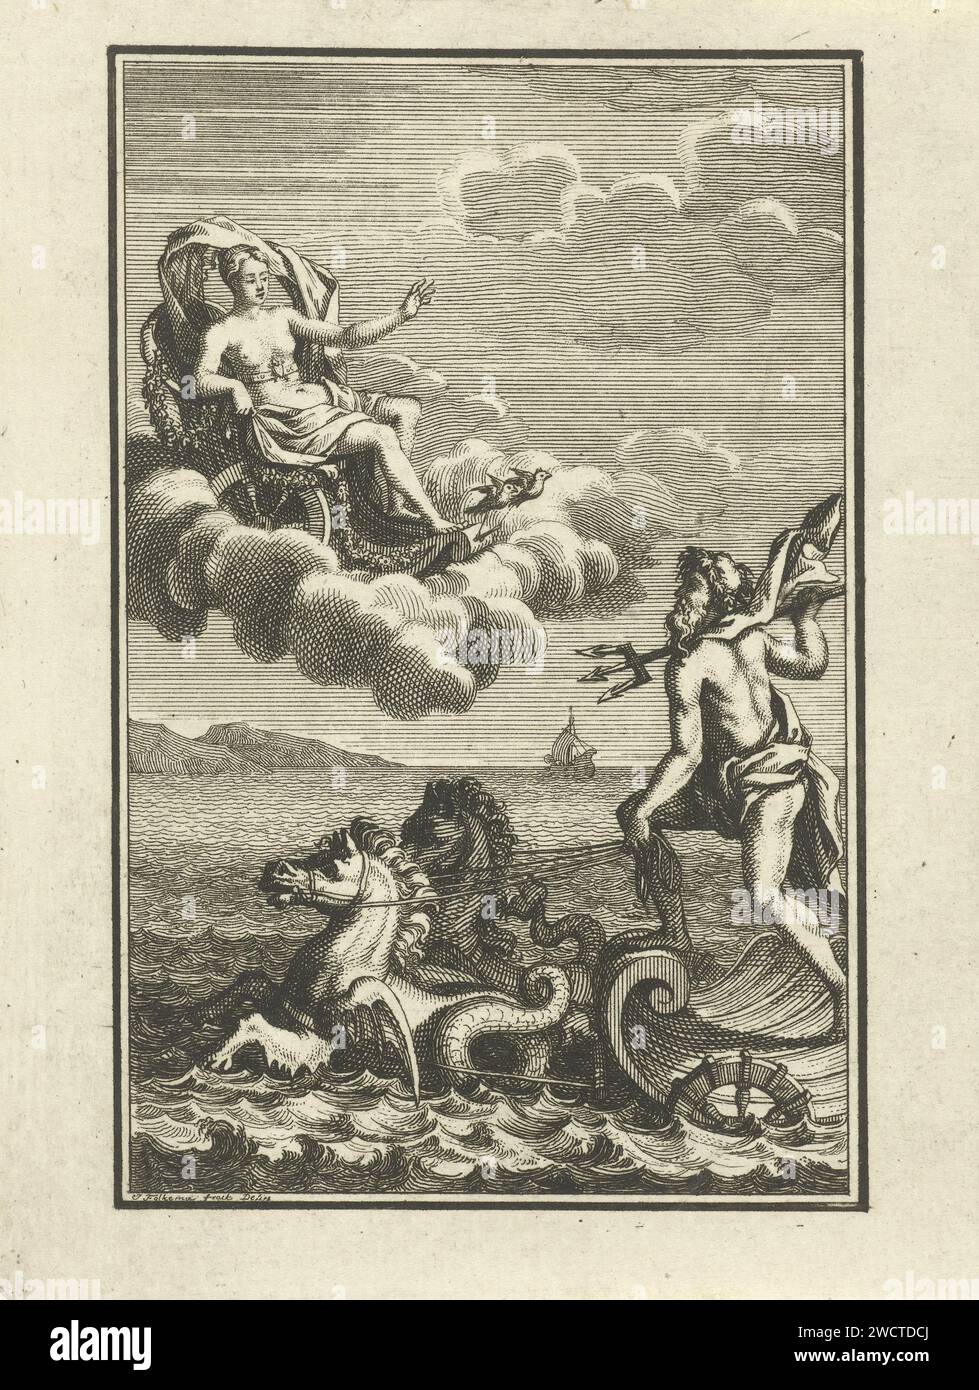 Venus en neptunus, Jacob Folkema, 1715 print Neptunus stands on a shell and is pulled by sea horses. He is in conversation with Venus who has descended from the air on her car, pulled by birds. Illustration made with a story from 'Adventures of Telemachus', written by François de Fénélon.  paper etching (story of) Telemachus. (story of) Venus (Aphrodite). (story of) Neptune (Poseidon) Stock Photo